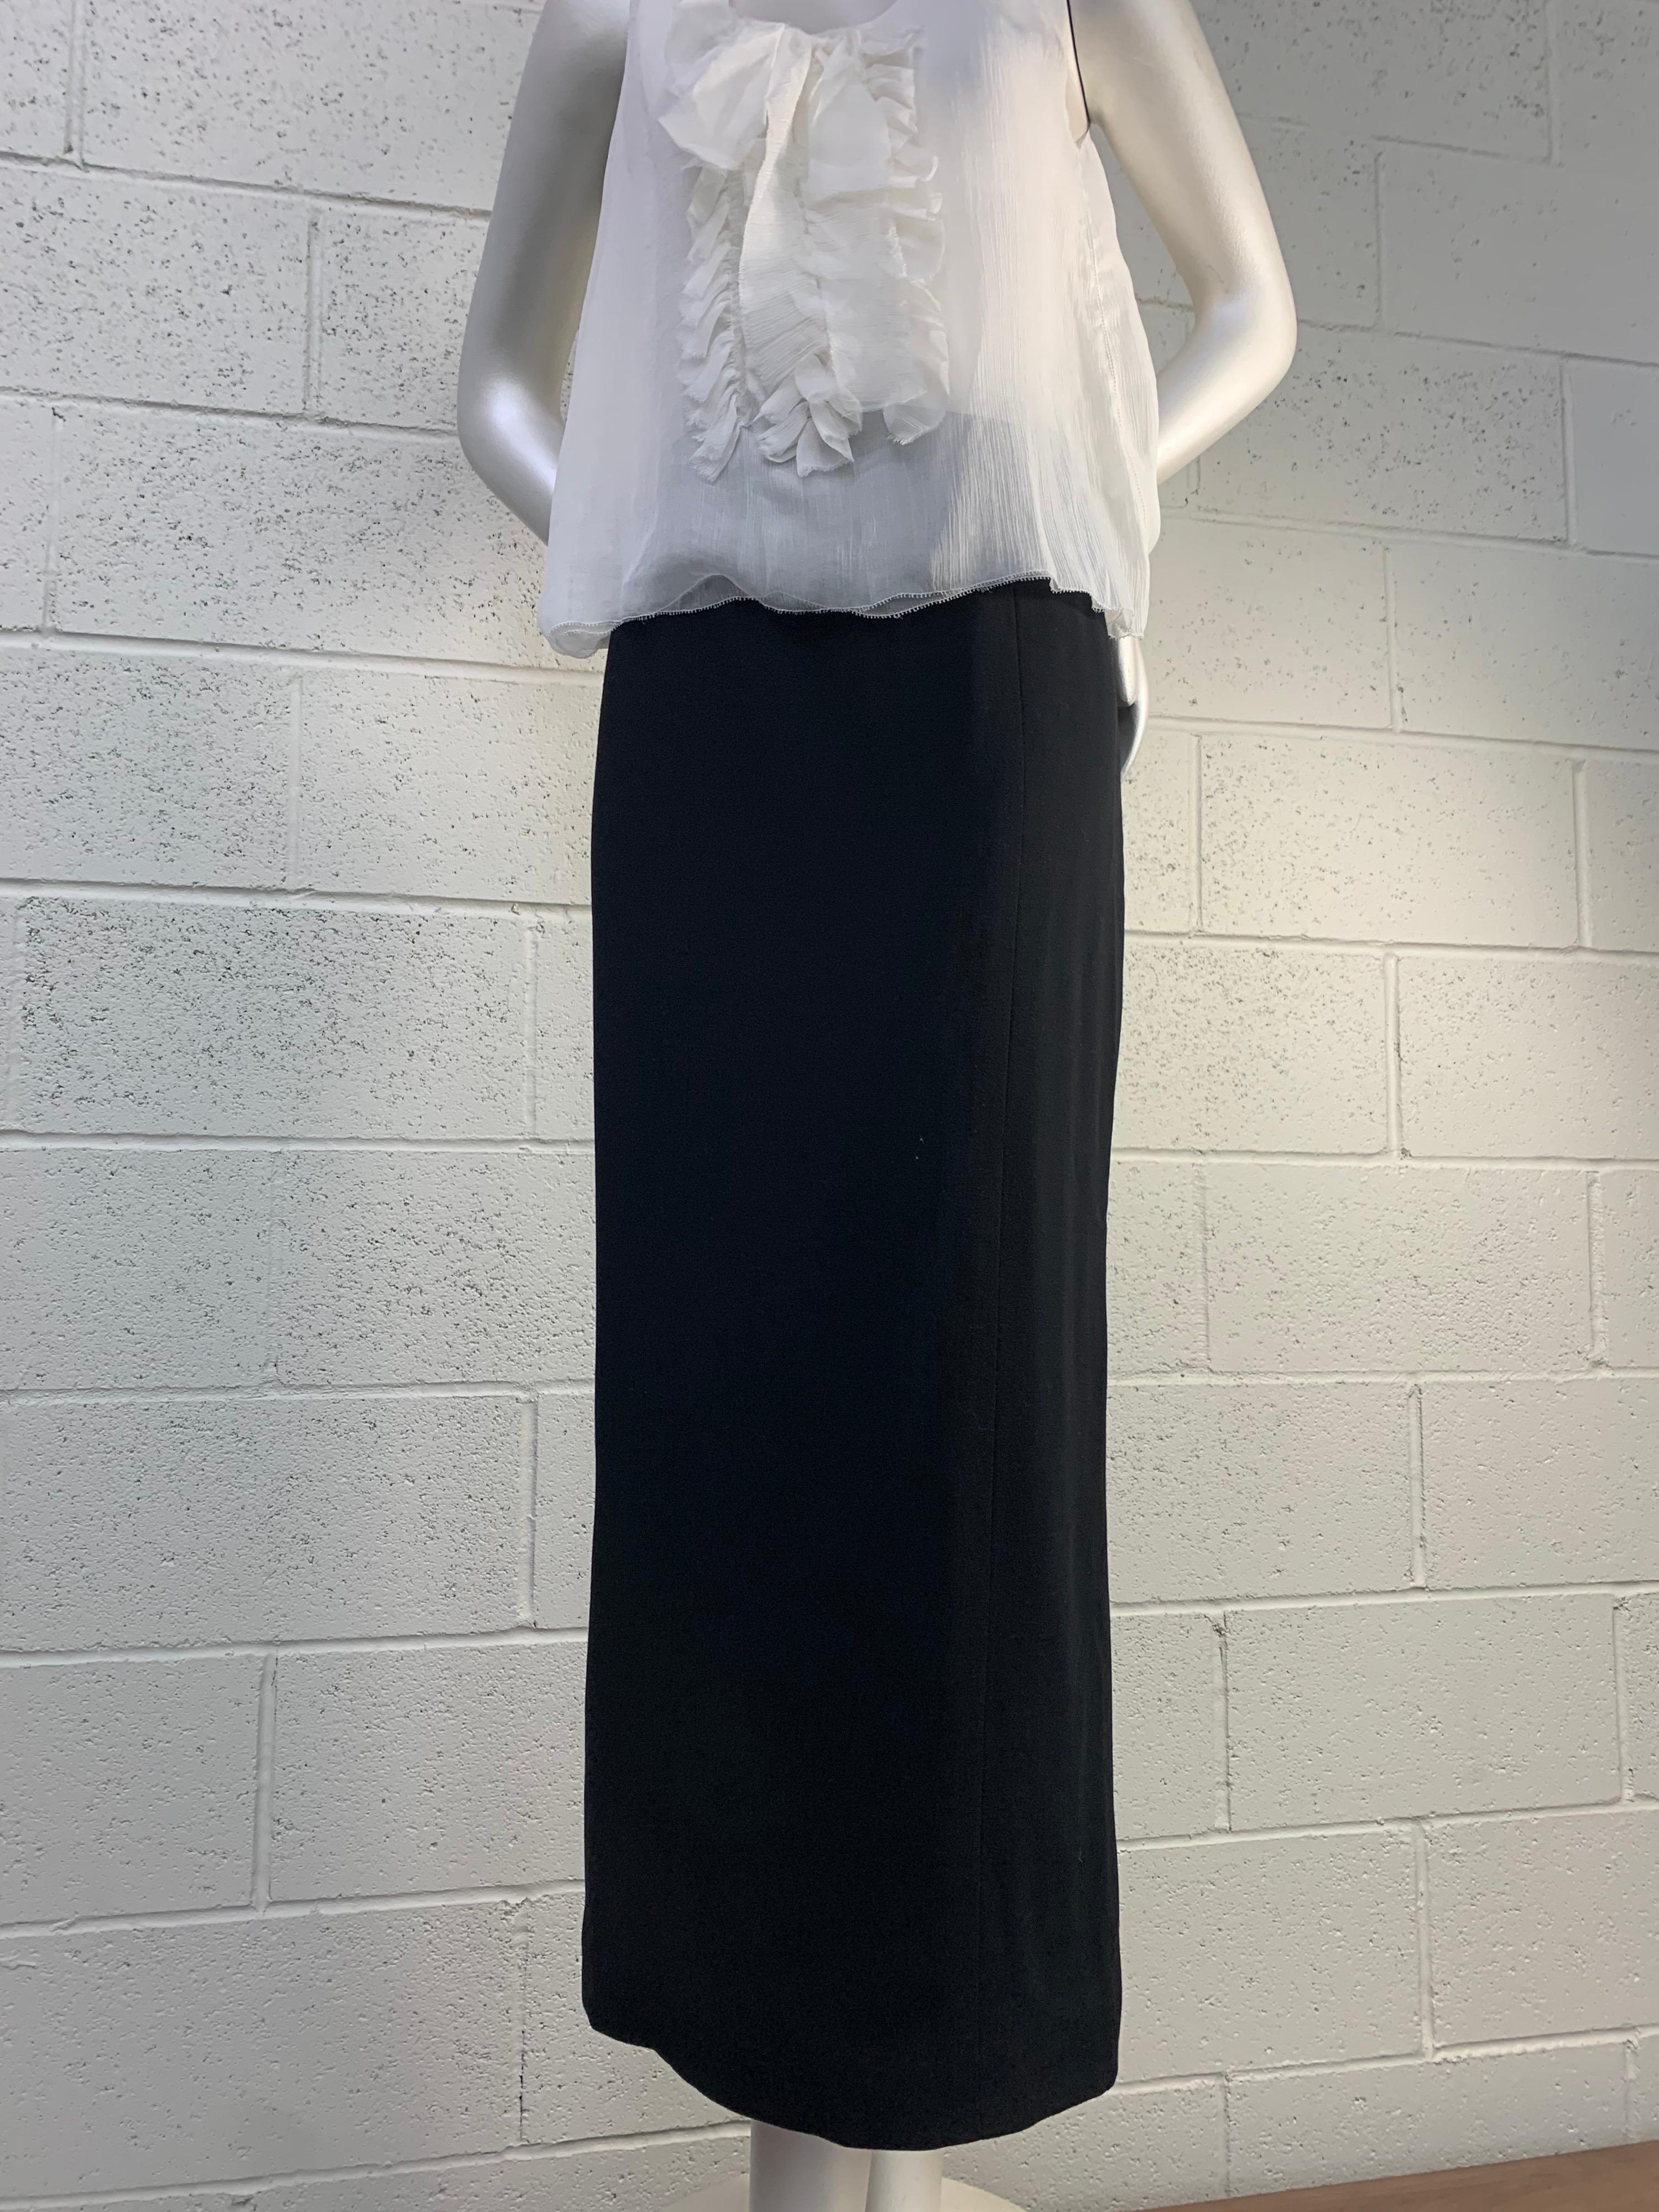 1998 Chanel Autumn Black Wool Crepe Pencil Skirt and White Silk Ruffled Camisole For Sale 6